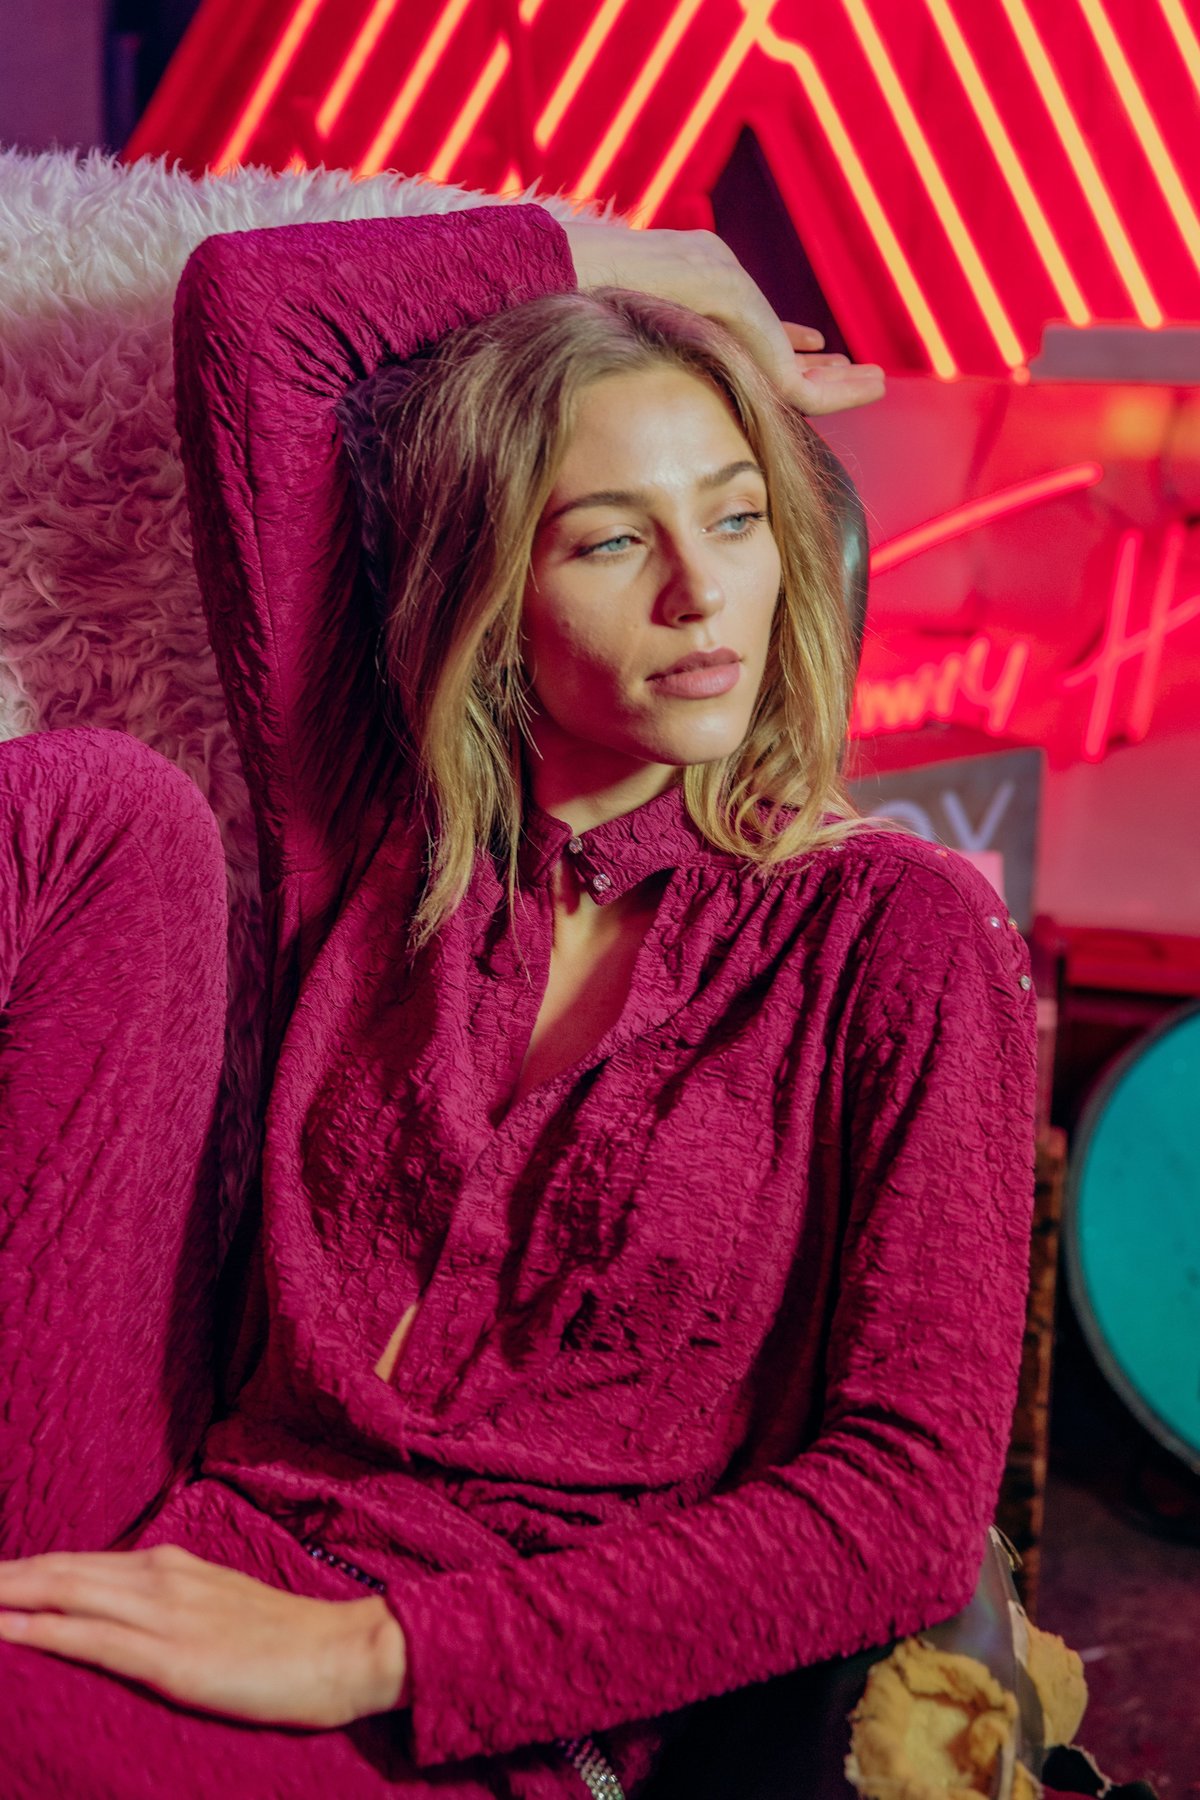 Anastazja wearing a pink jumpsuit, leaning back in a leather armchair, surrounded by neon signs